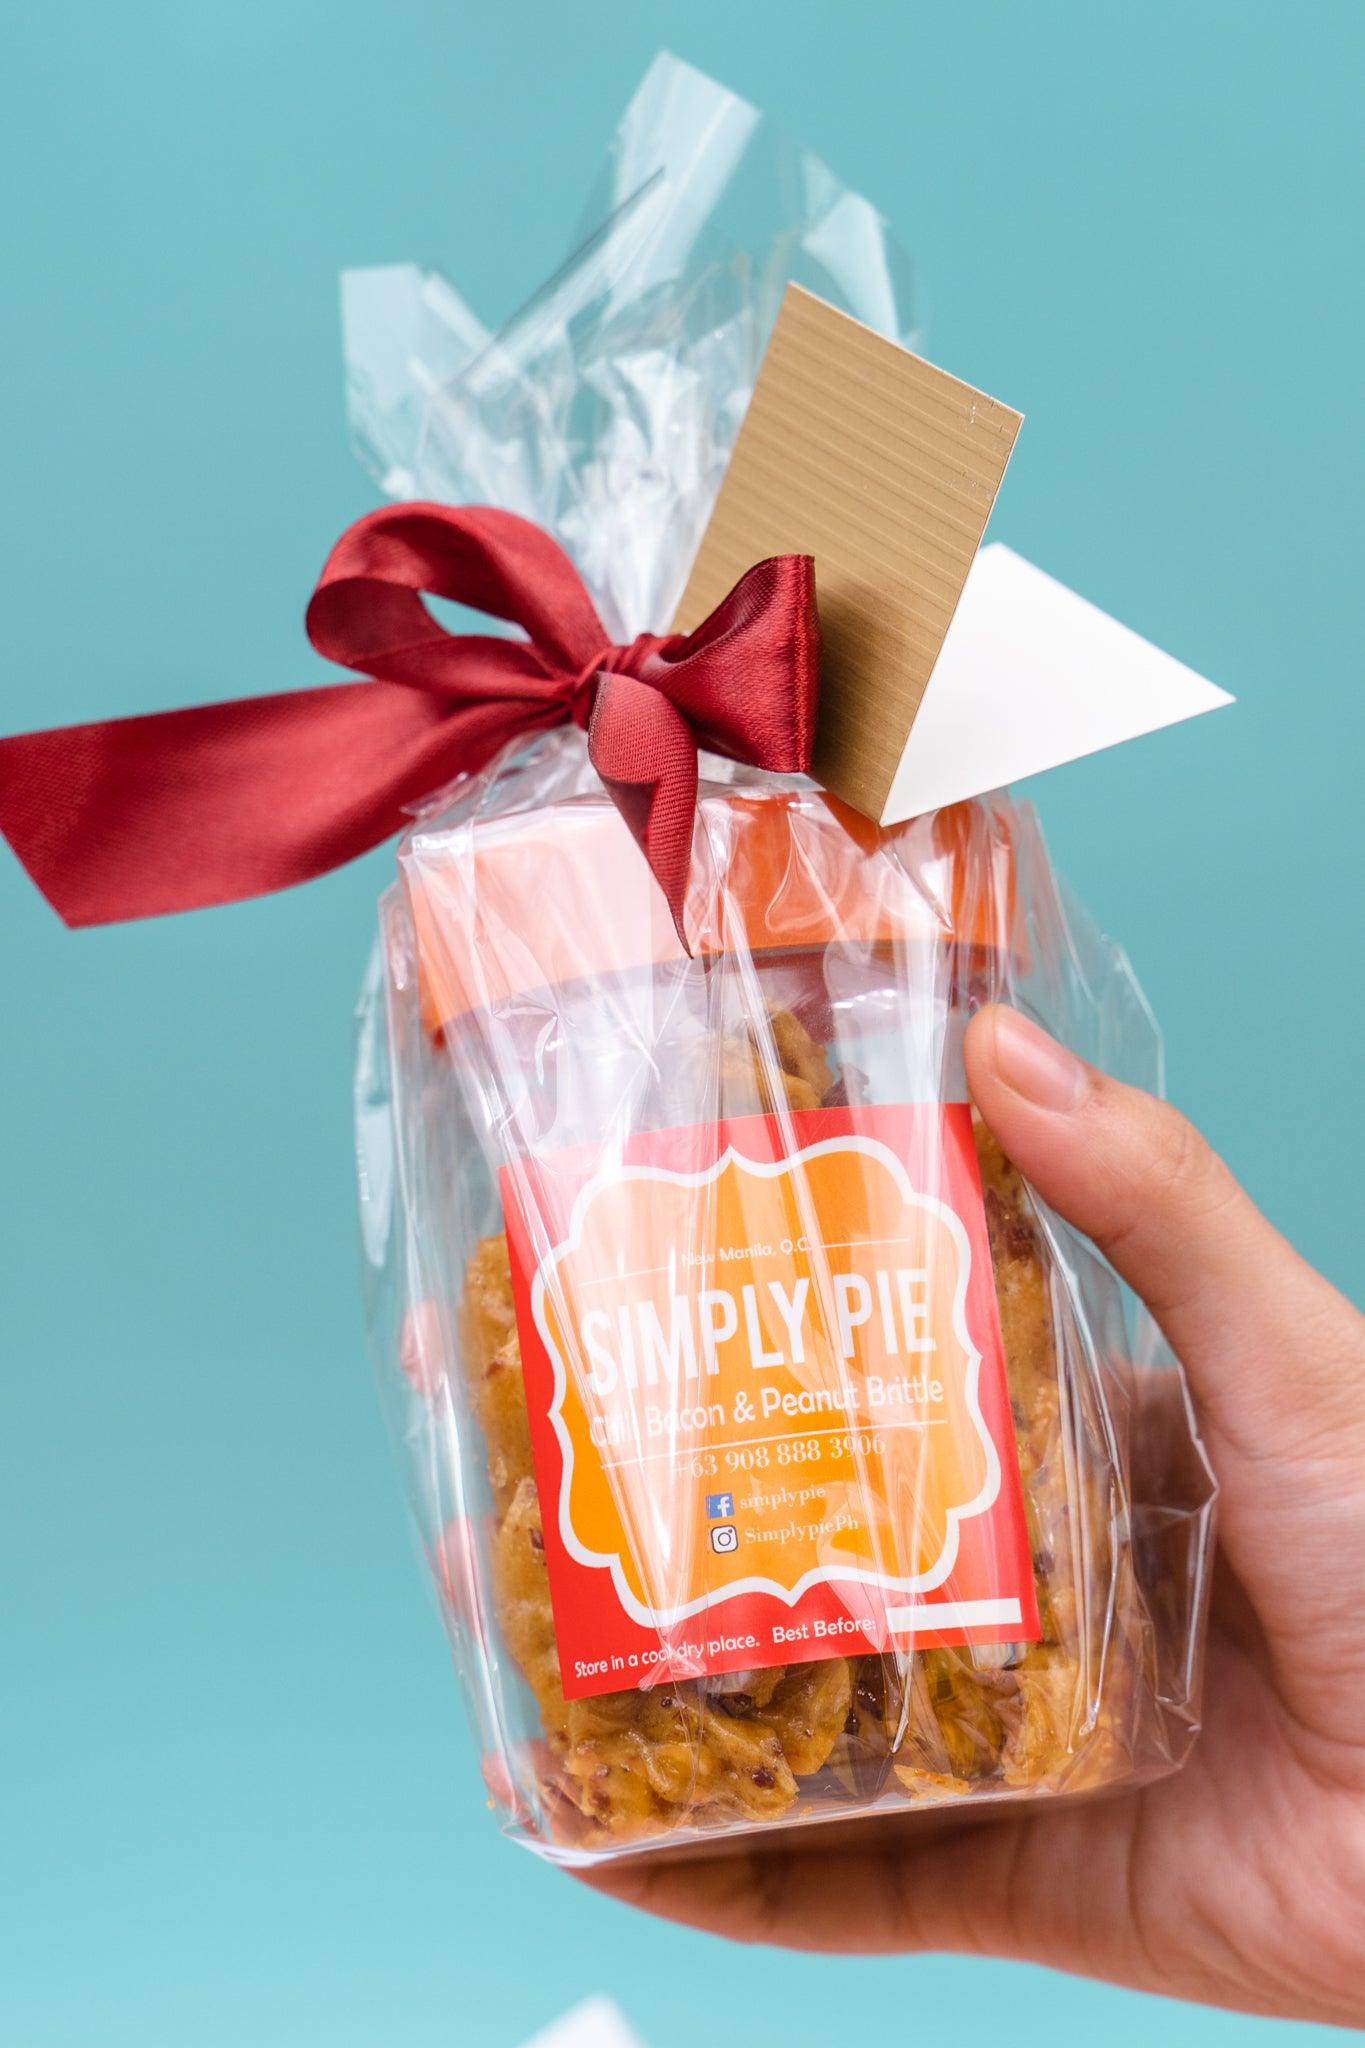 ADD ON: Simply Pie's Chili Bacon and Peanut Brittle - Bloomingailsph